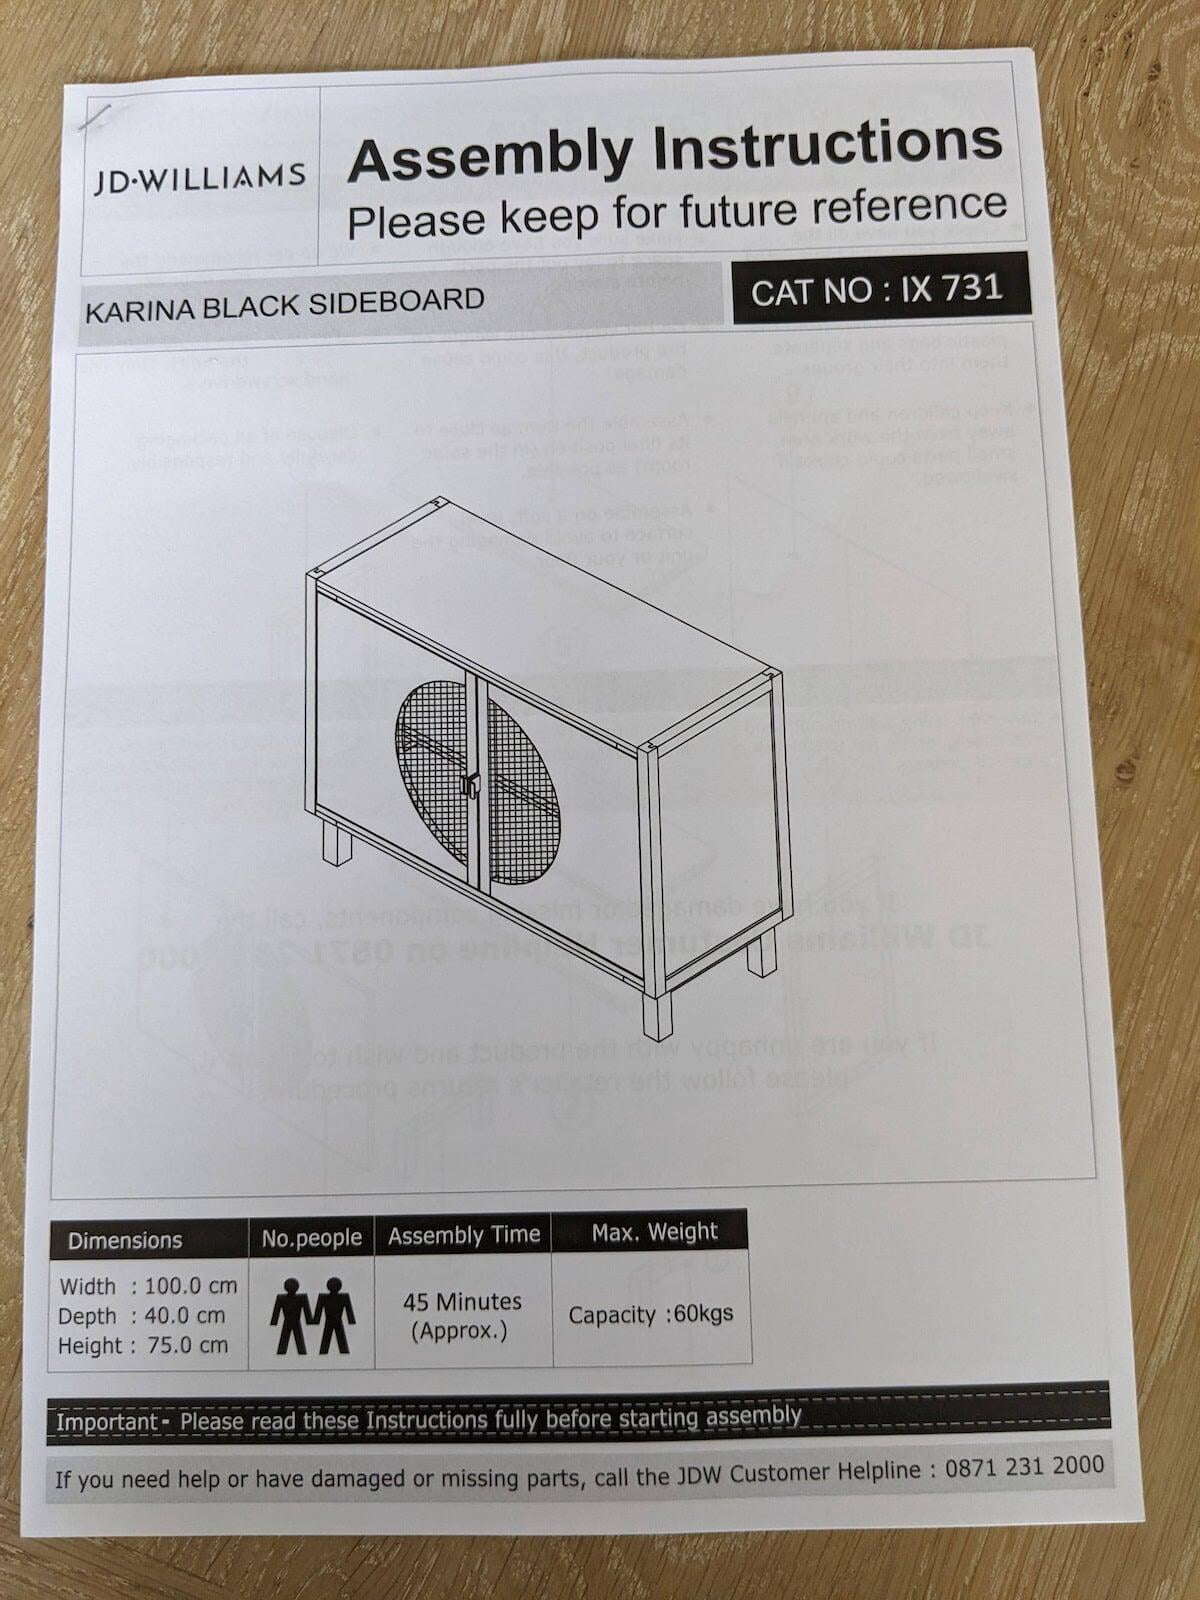 Furniture Assembly - read the instructions